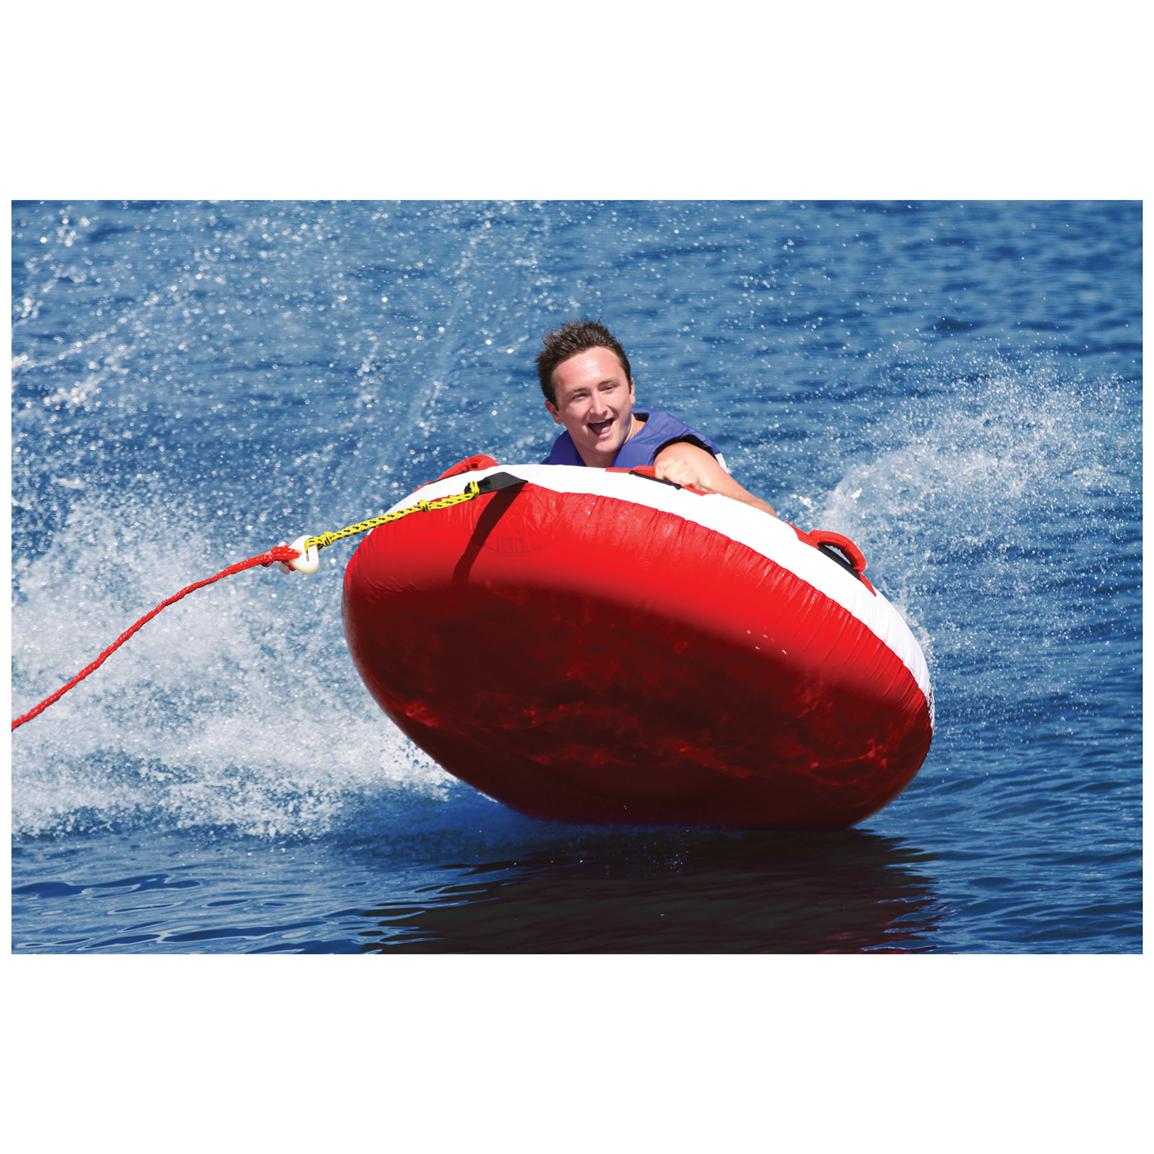 AIRHEAD Viper 2 Person Rider Inflatable Towable Boat Tow Tube Water Tubing 